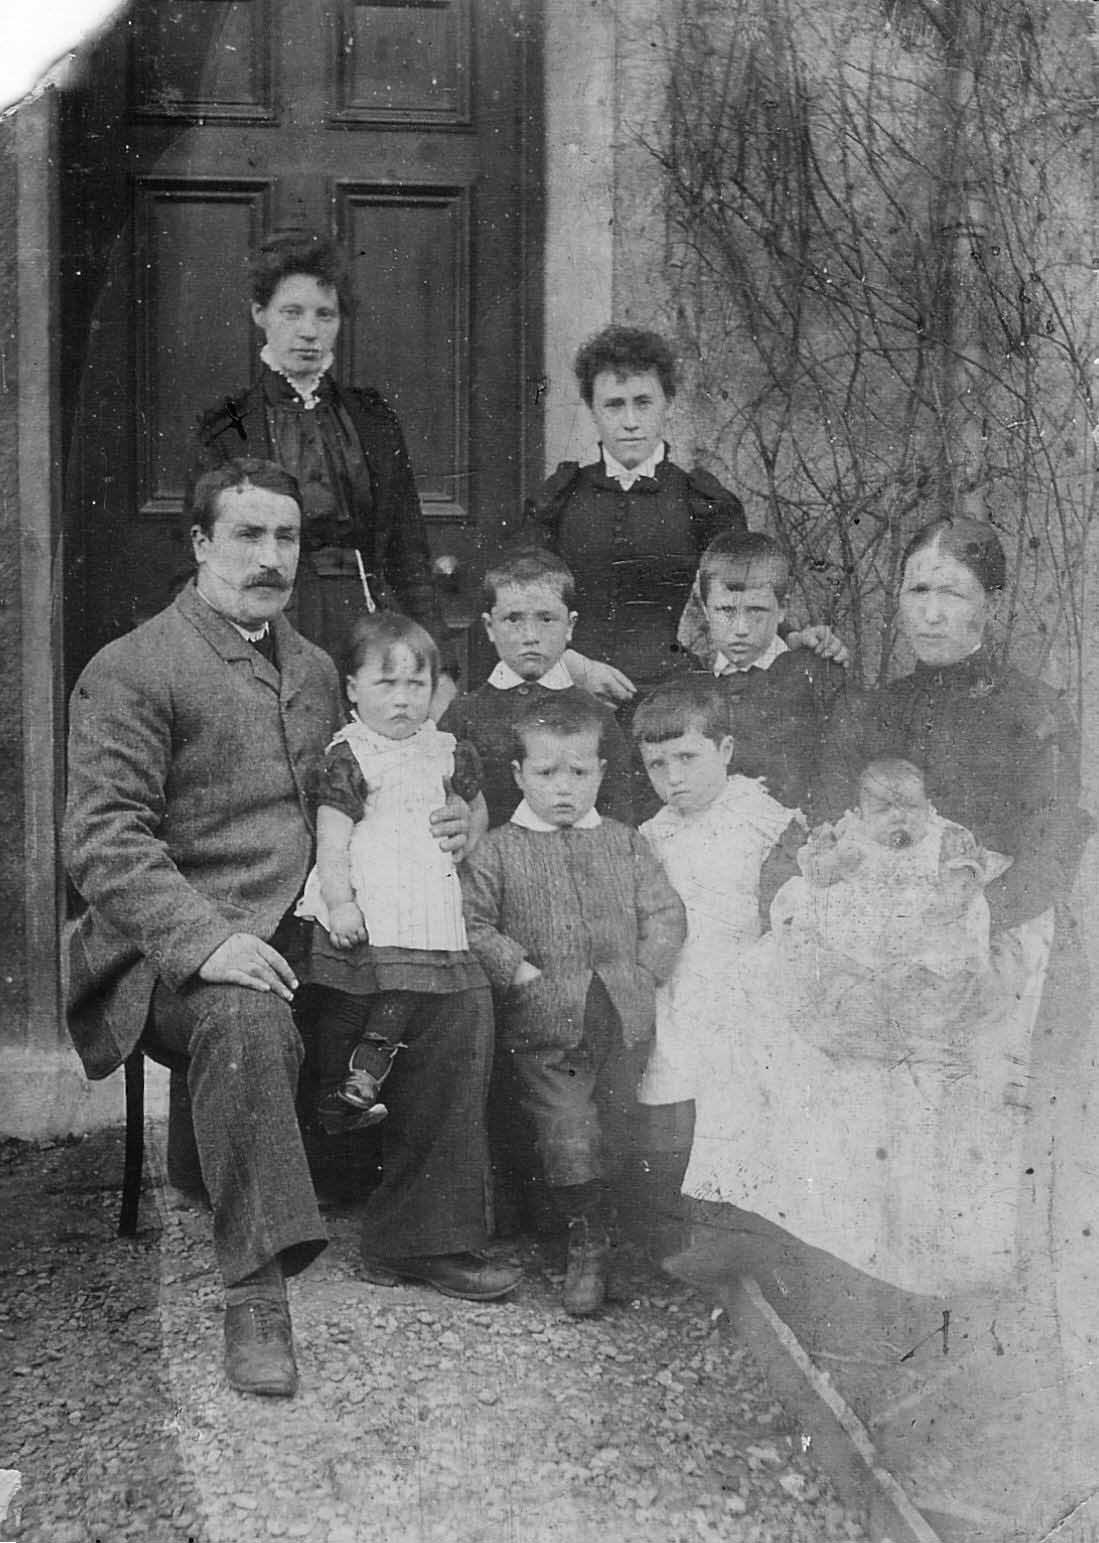 Taken in 1892 and sourced from John Maxwell family photo.